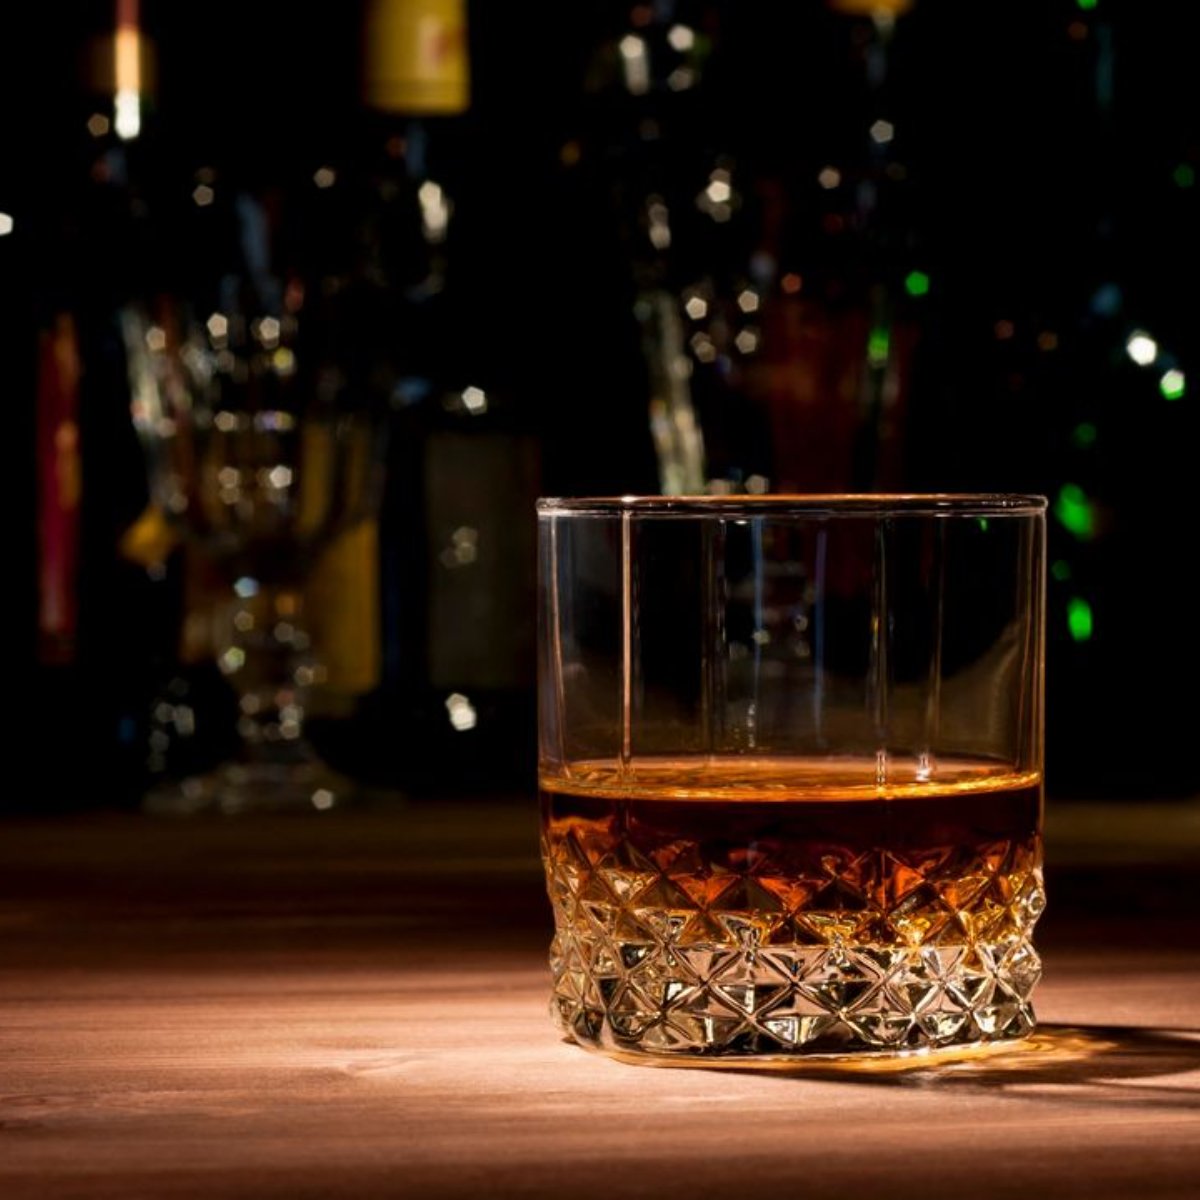 Fill your glass with a new whiskey! What's one you've been wanting to try?